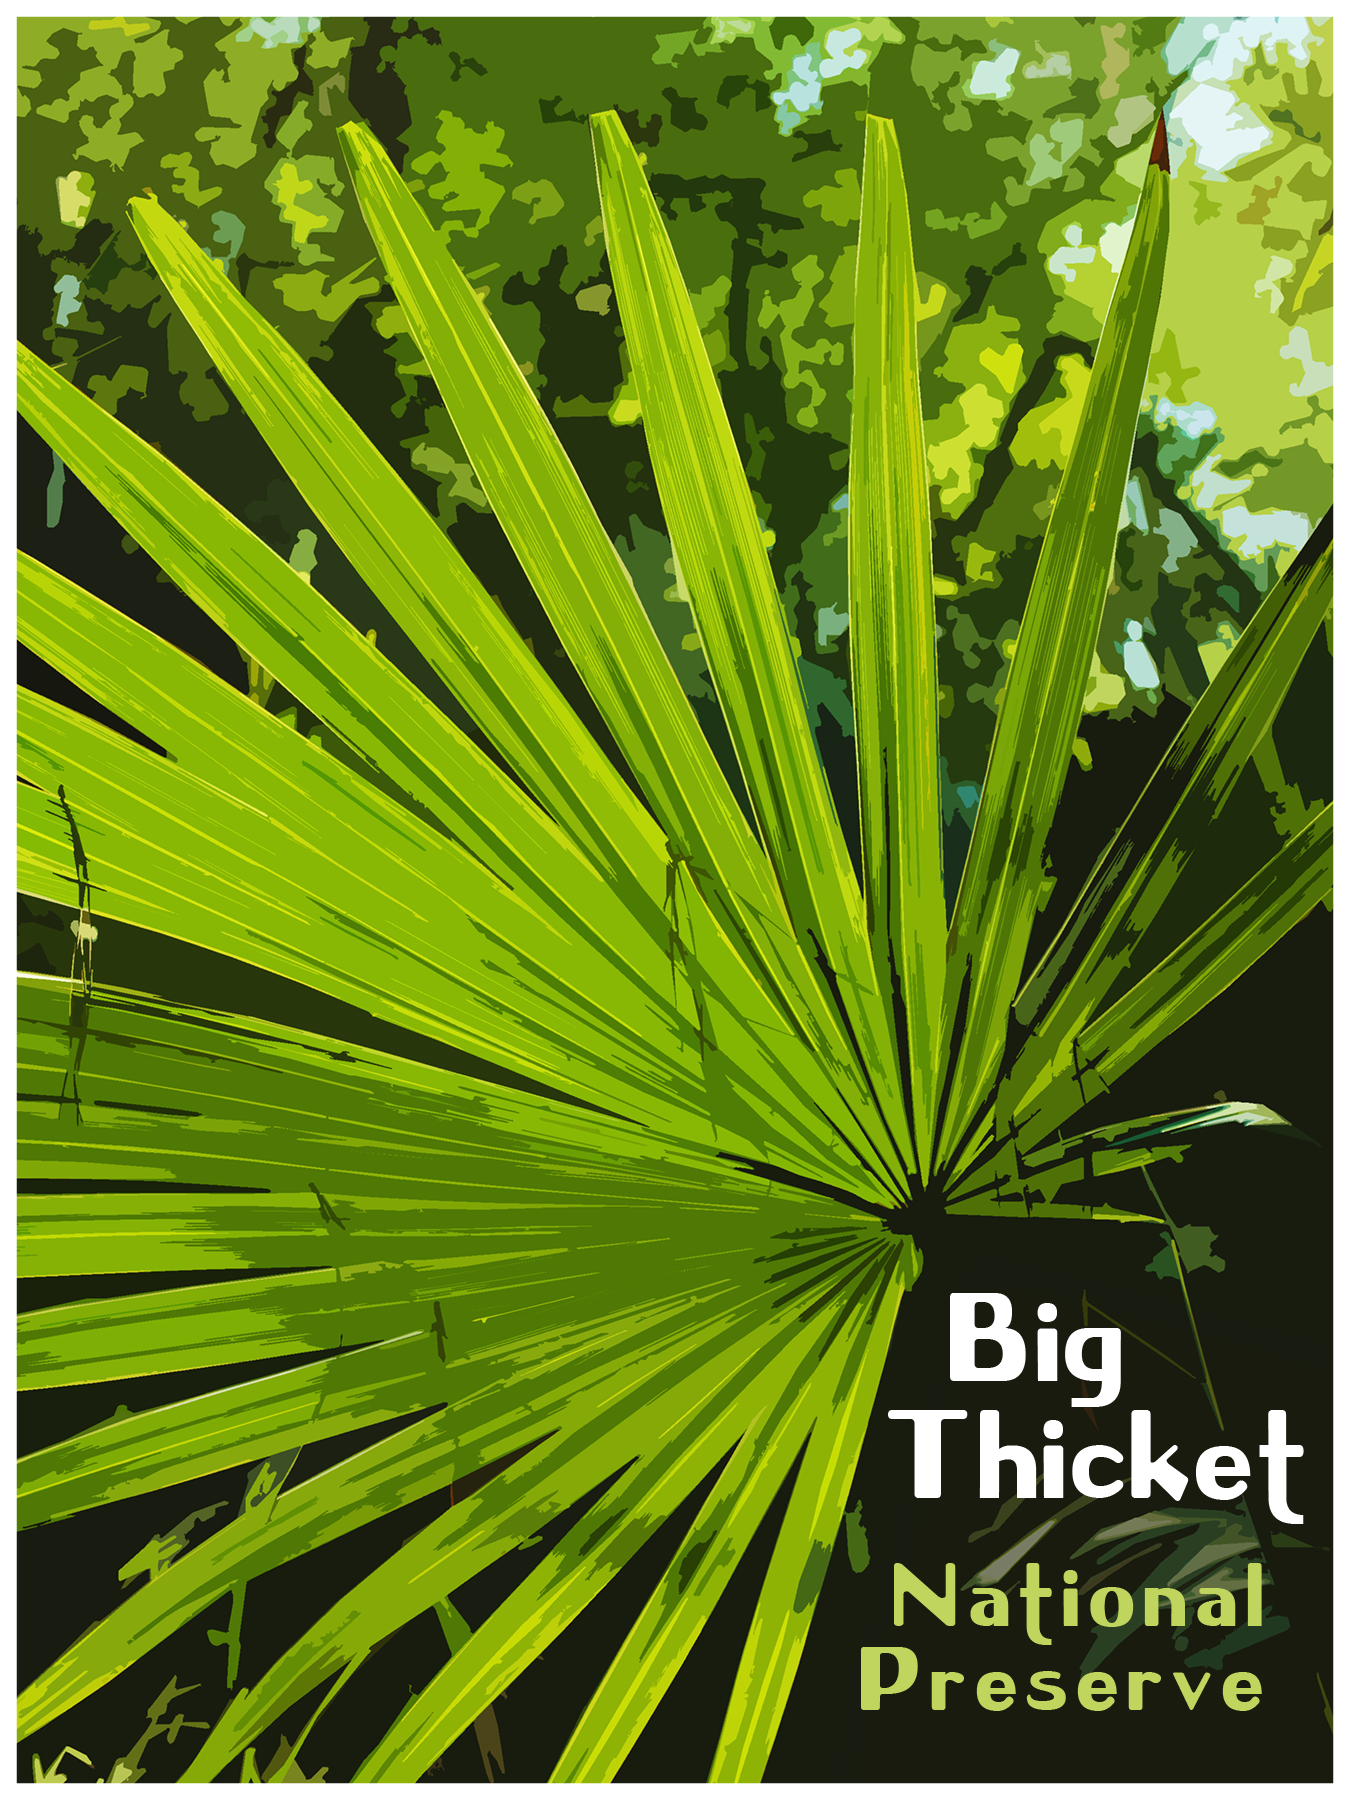 a palmetto leaf glowing in the sunlight with text that reads "Big Thicket National Preserve"